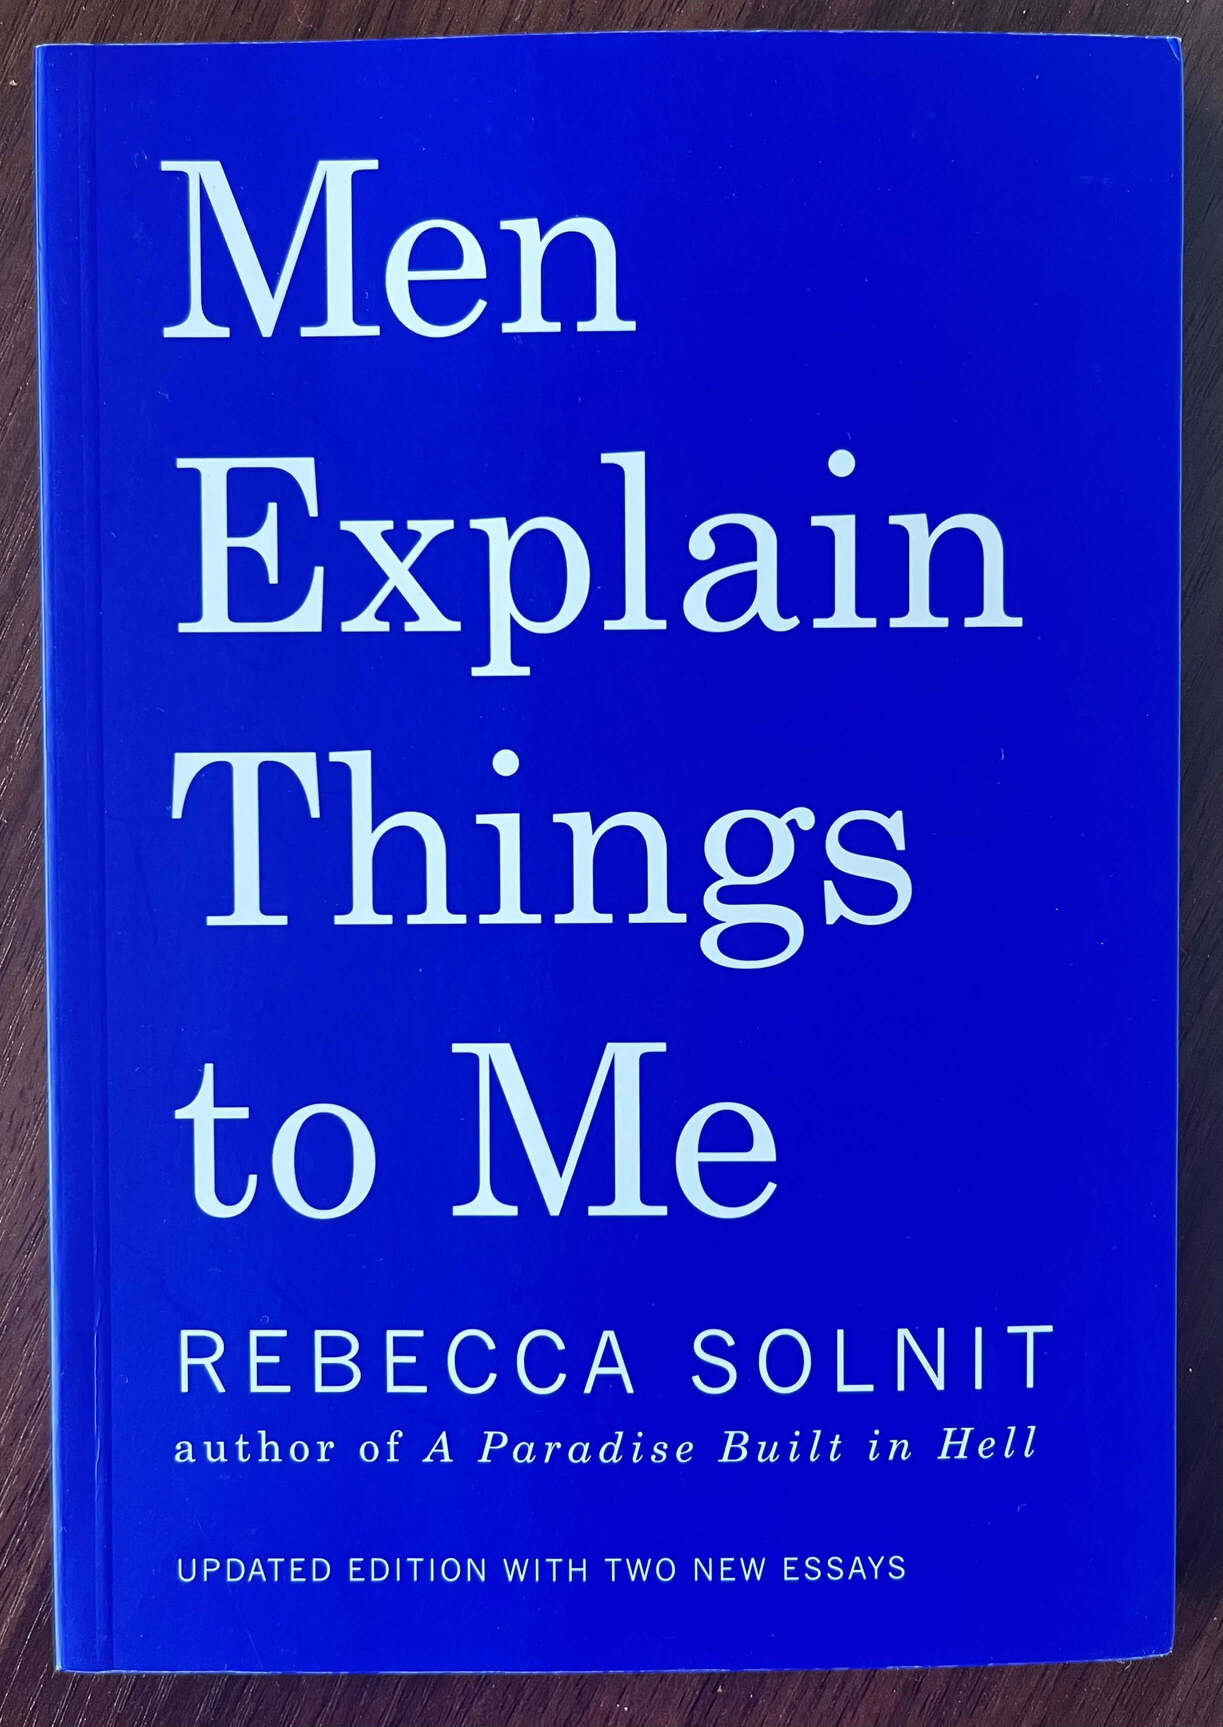 “Men Explain Things to Me” by Rebecca Solnit.